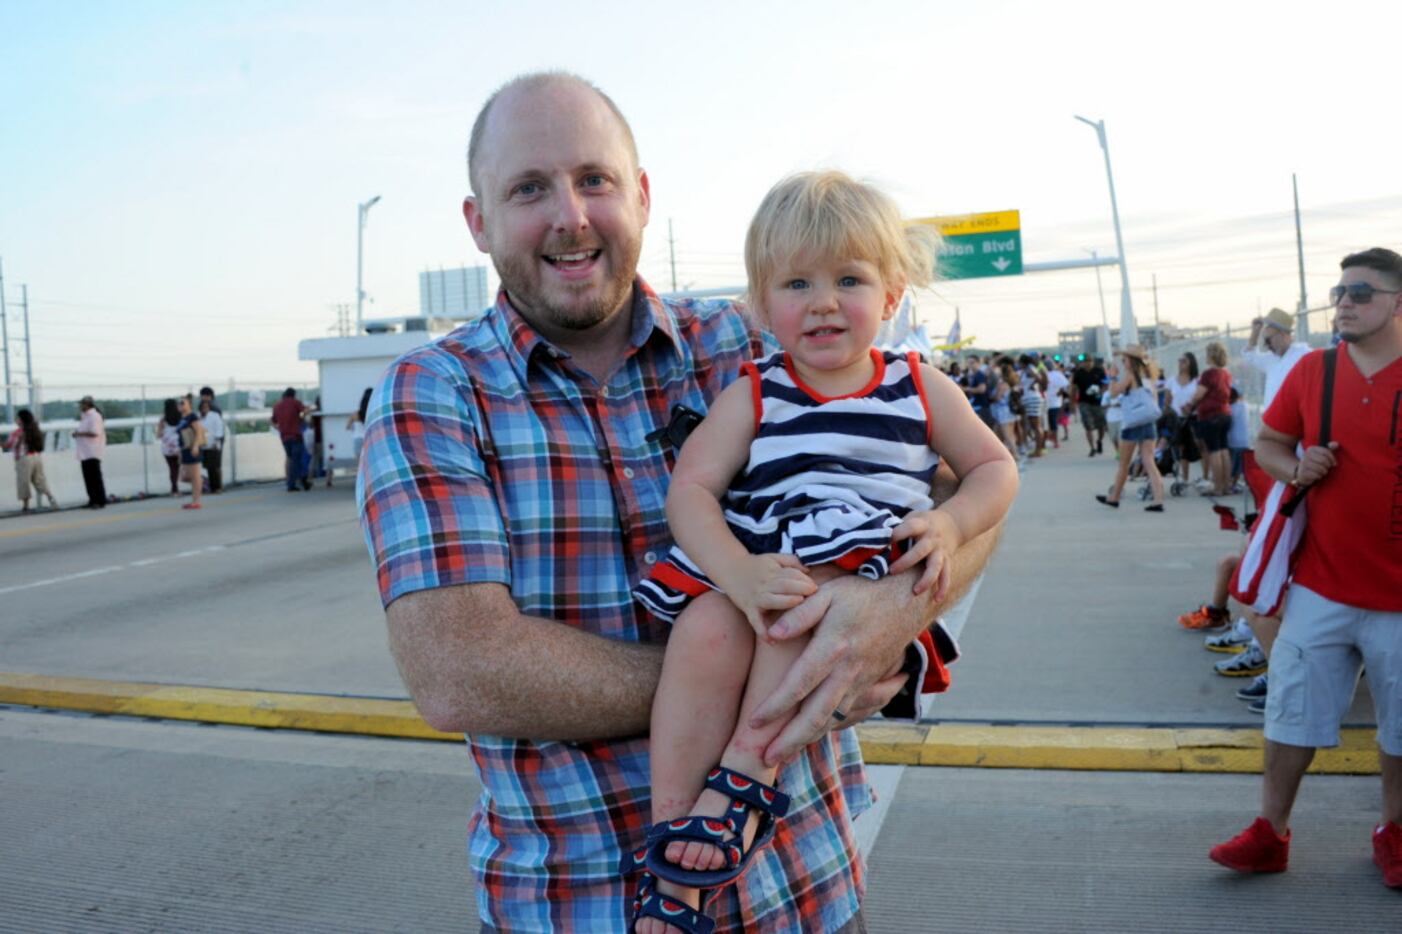 James and his daughter Ainsley McQuery wait for the fireworks show at Red, White, and Boom...